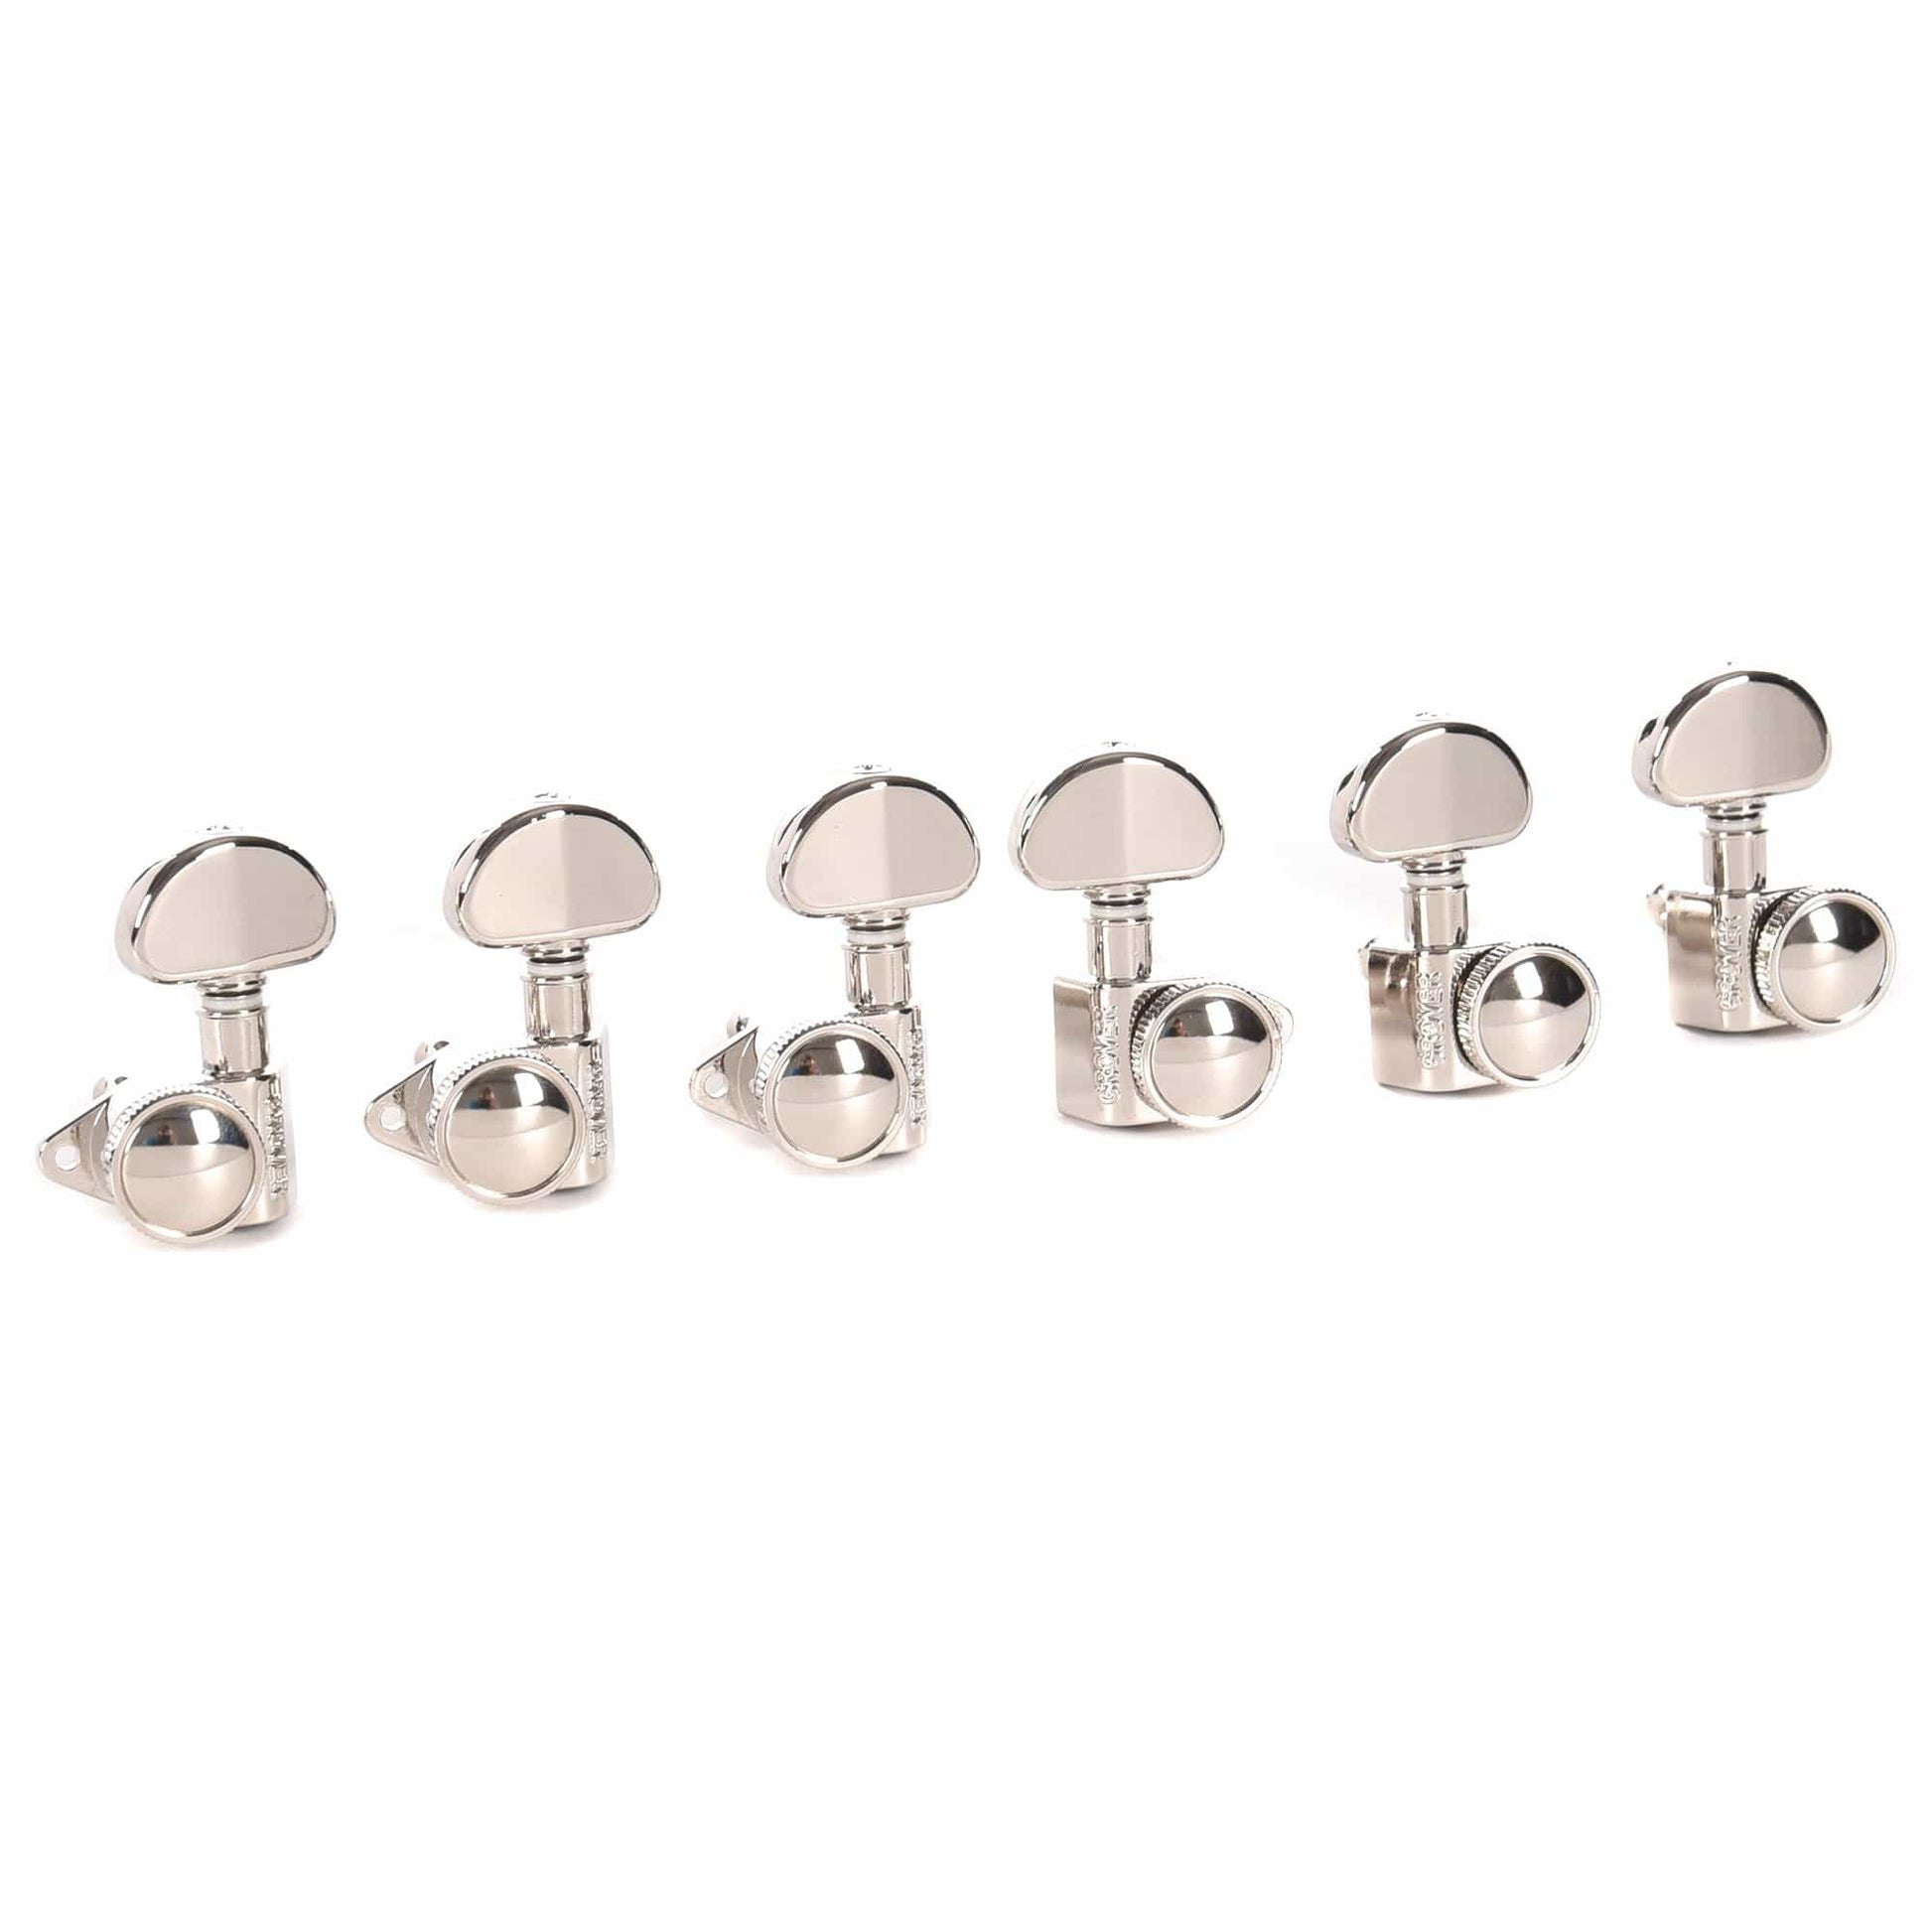 Grover 502 Series 3x3 Locking Tuners Nickel Parts / Tuning Heads